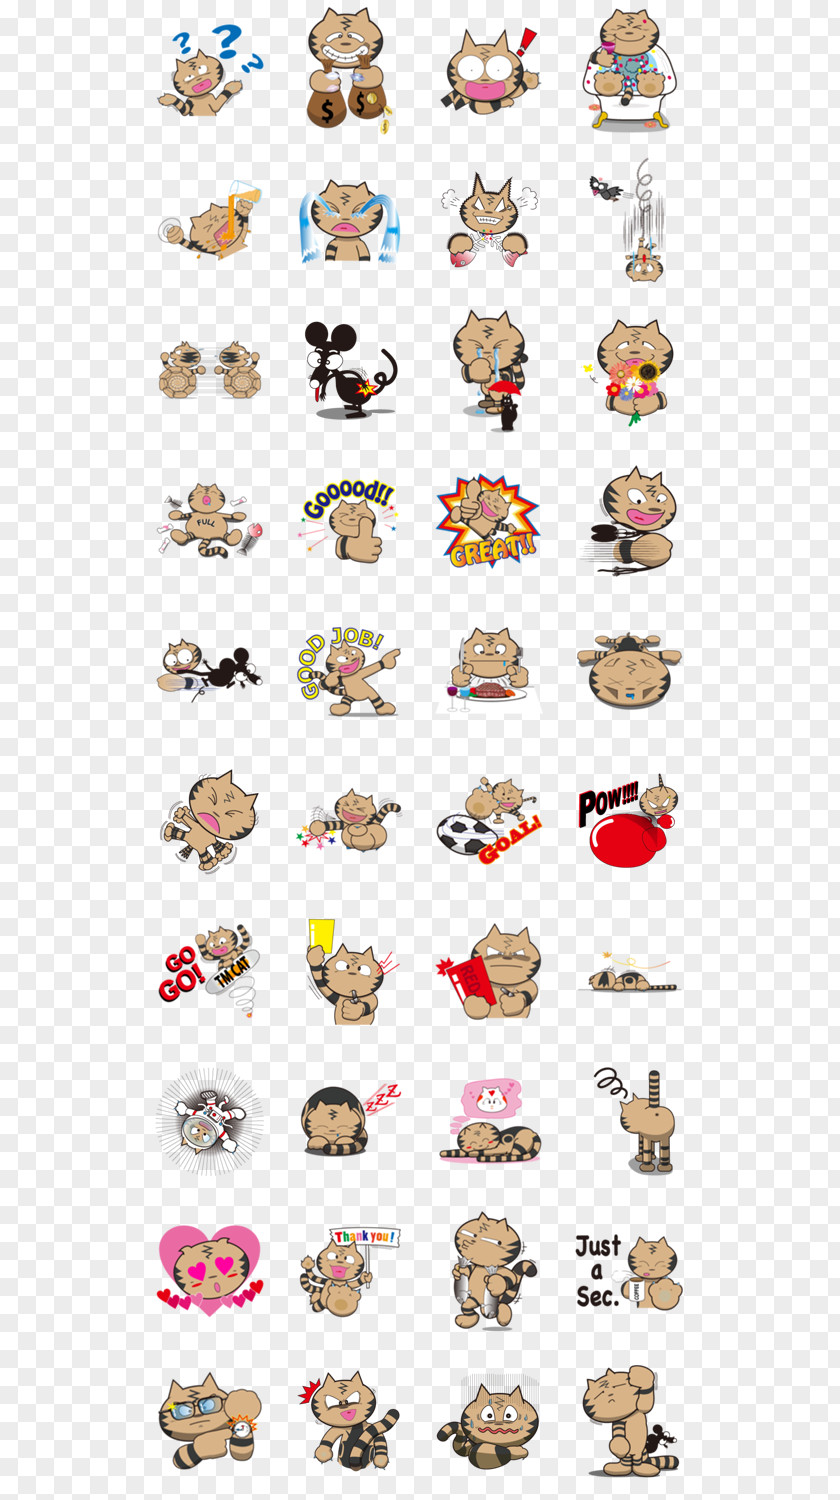 Shop Goods HJ-Story Sticker LINE Emoticon クリエイターズスタンプ PNG